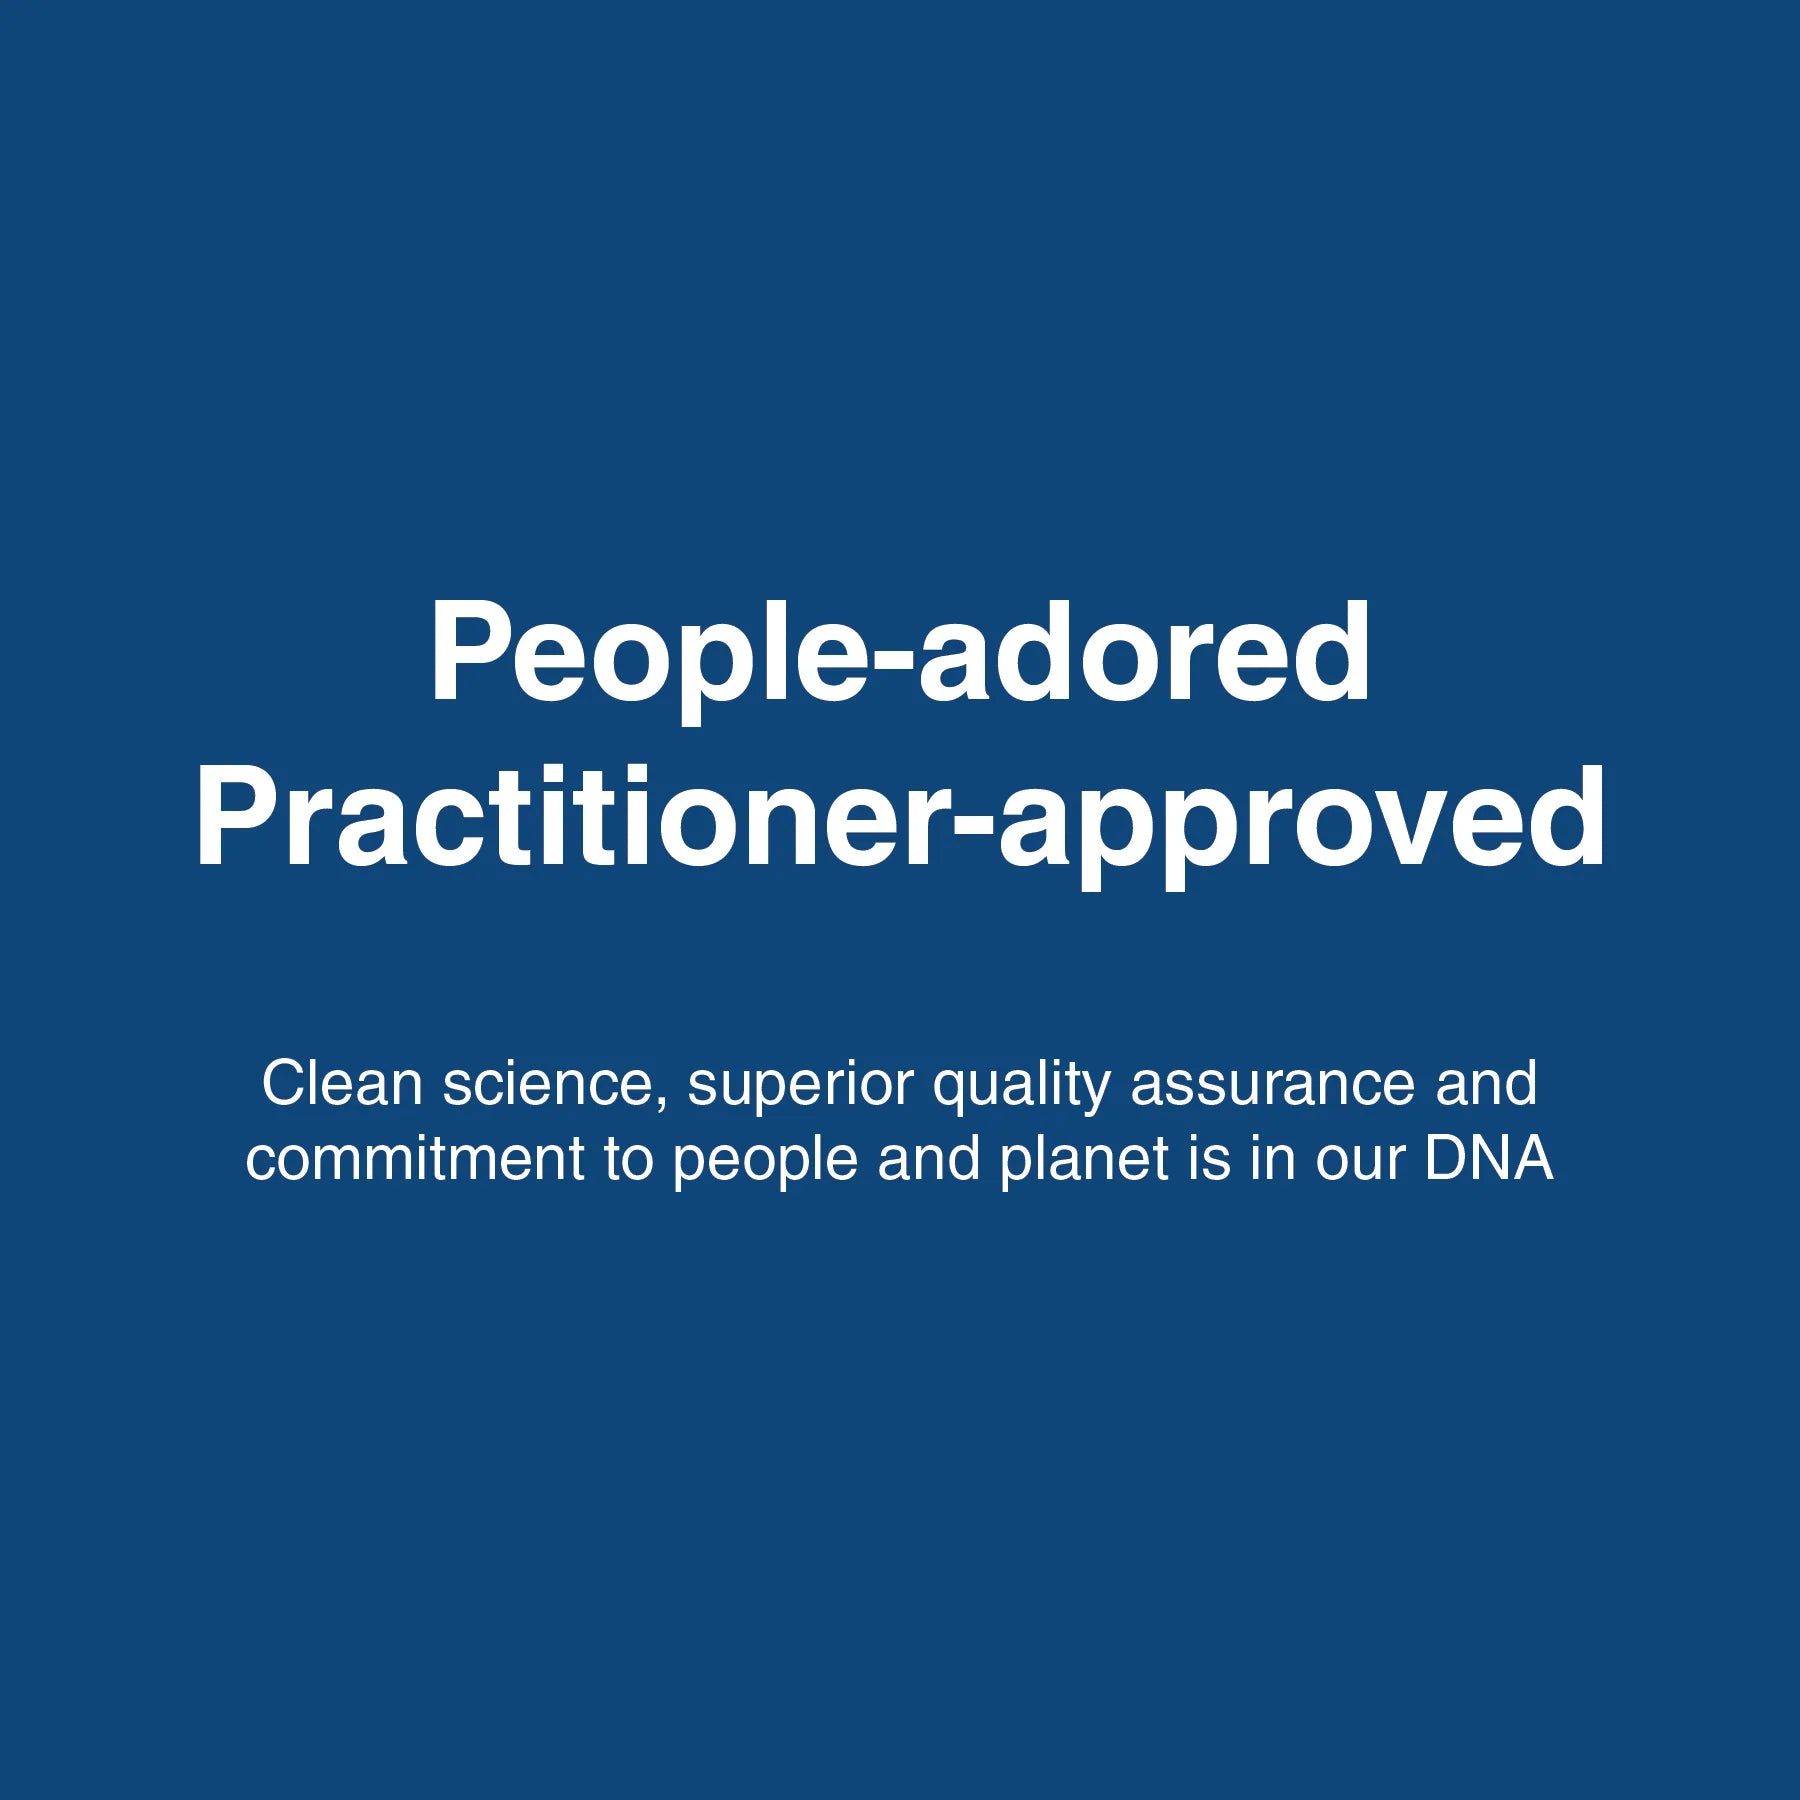 People-adored, Practitioner-approved.